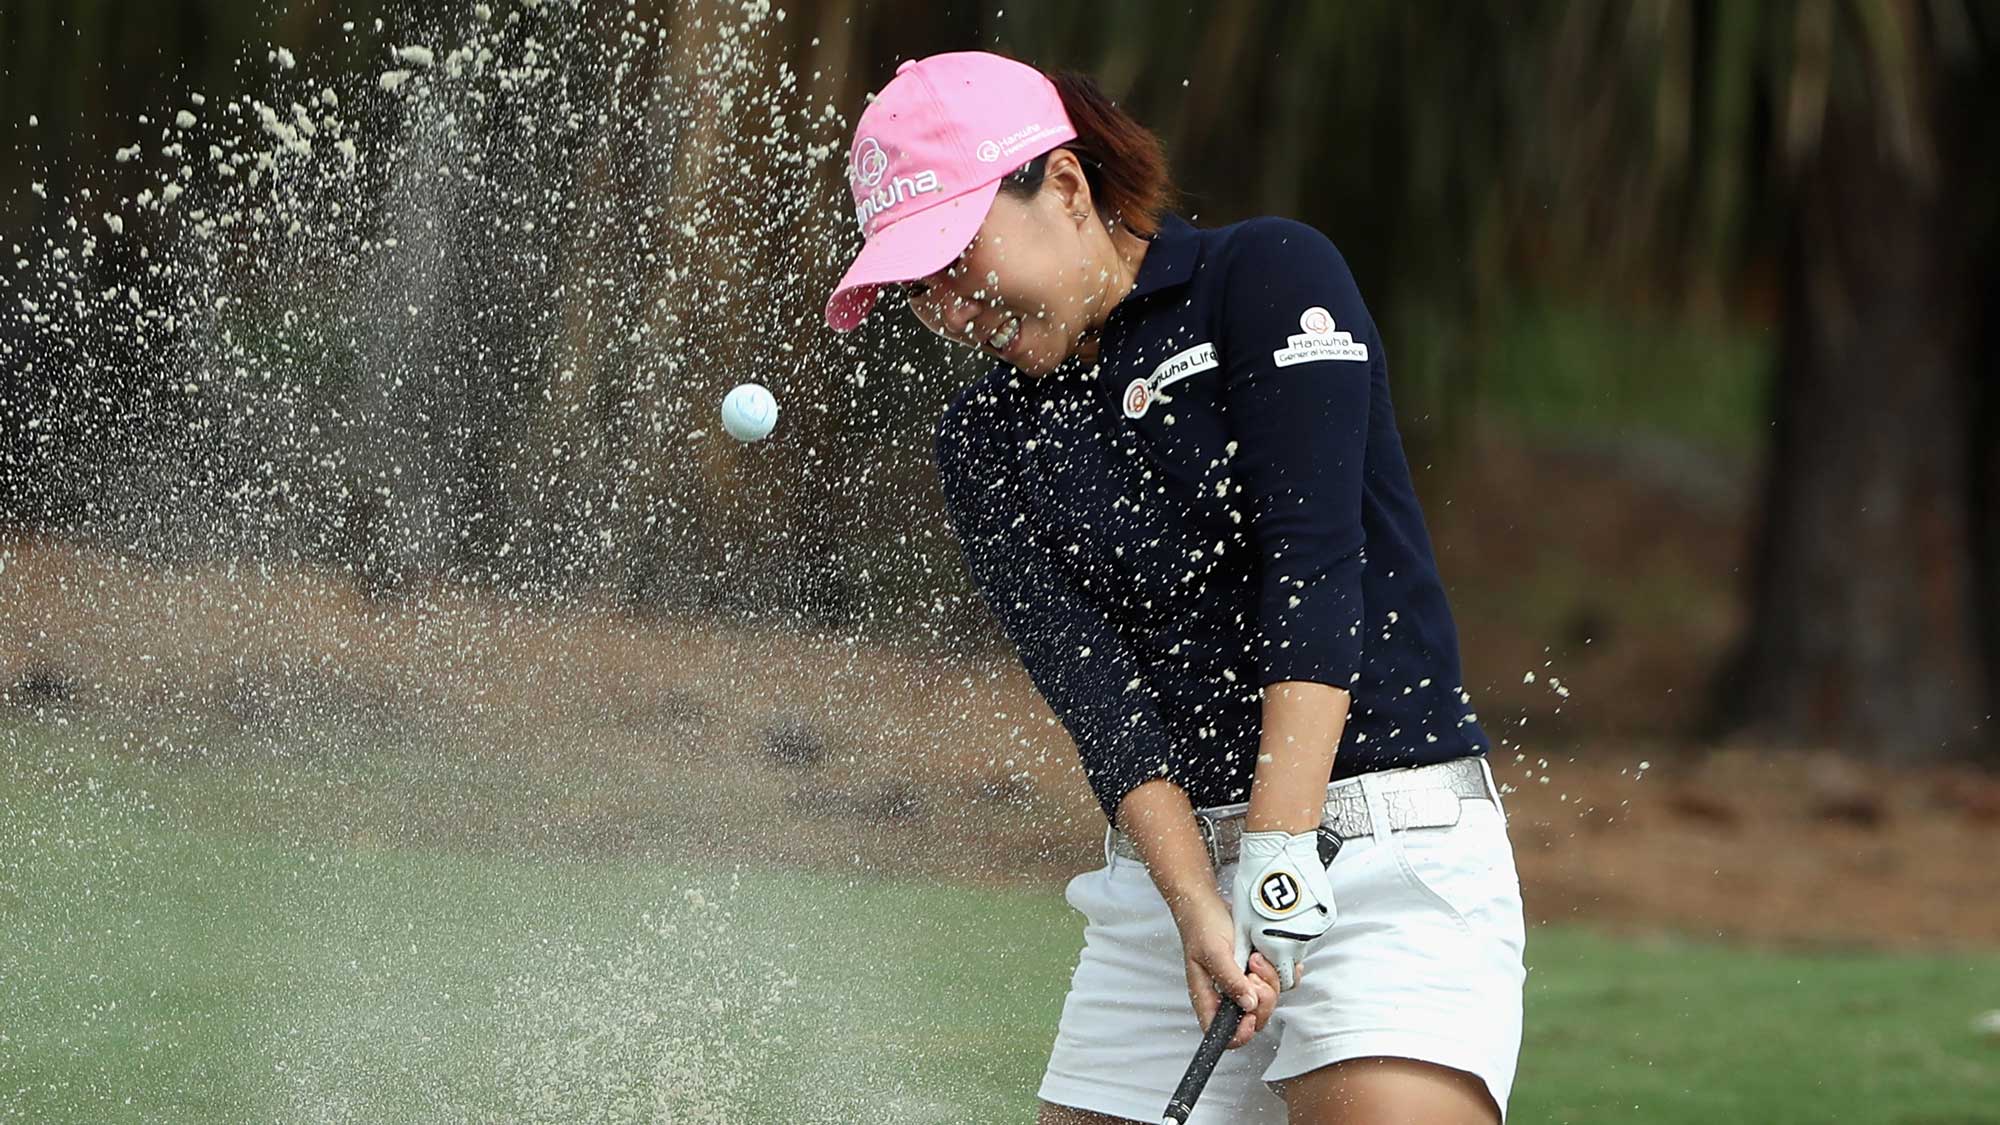 In-Kyung Kim of Korea plays a shot from a greenside bunker on the sixth hole during round one of the CME Group Tour Championship